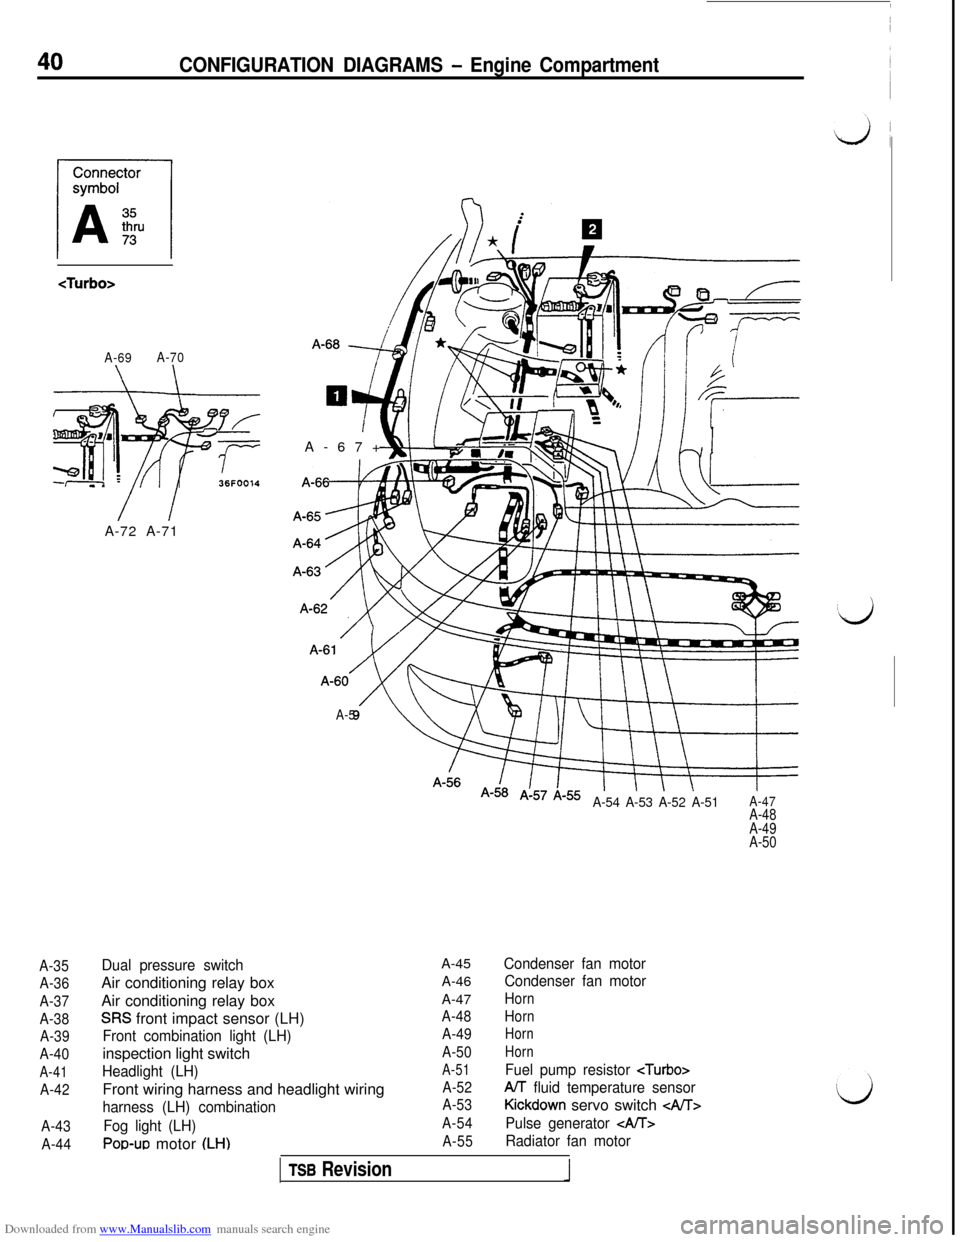 MITSUBISHI 3000GT 1996 2.G Service Manual Downloaded from www.Manualslib.com manuals search engine CONFIGURATION DIAGRAMS - Engine Compartment
<Turbo>
A-69A-70
\ \
36FOO14
A-35
A-36
A-37
A-38
A-39
A-40
A-41
A-42
A-43
A-44A-72 A-71A-67+
A-5
A-